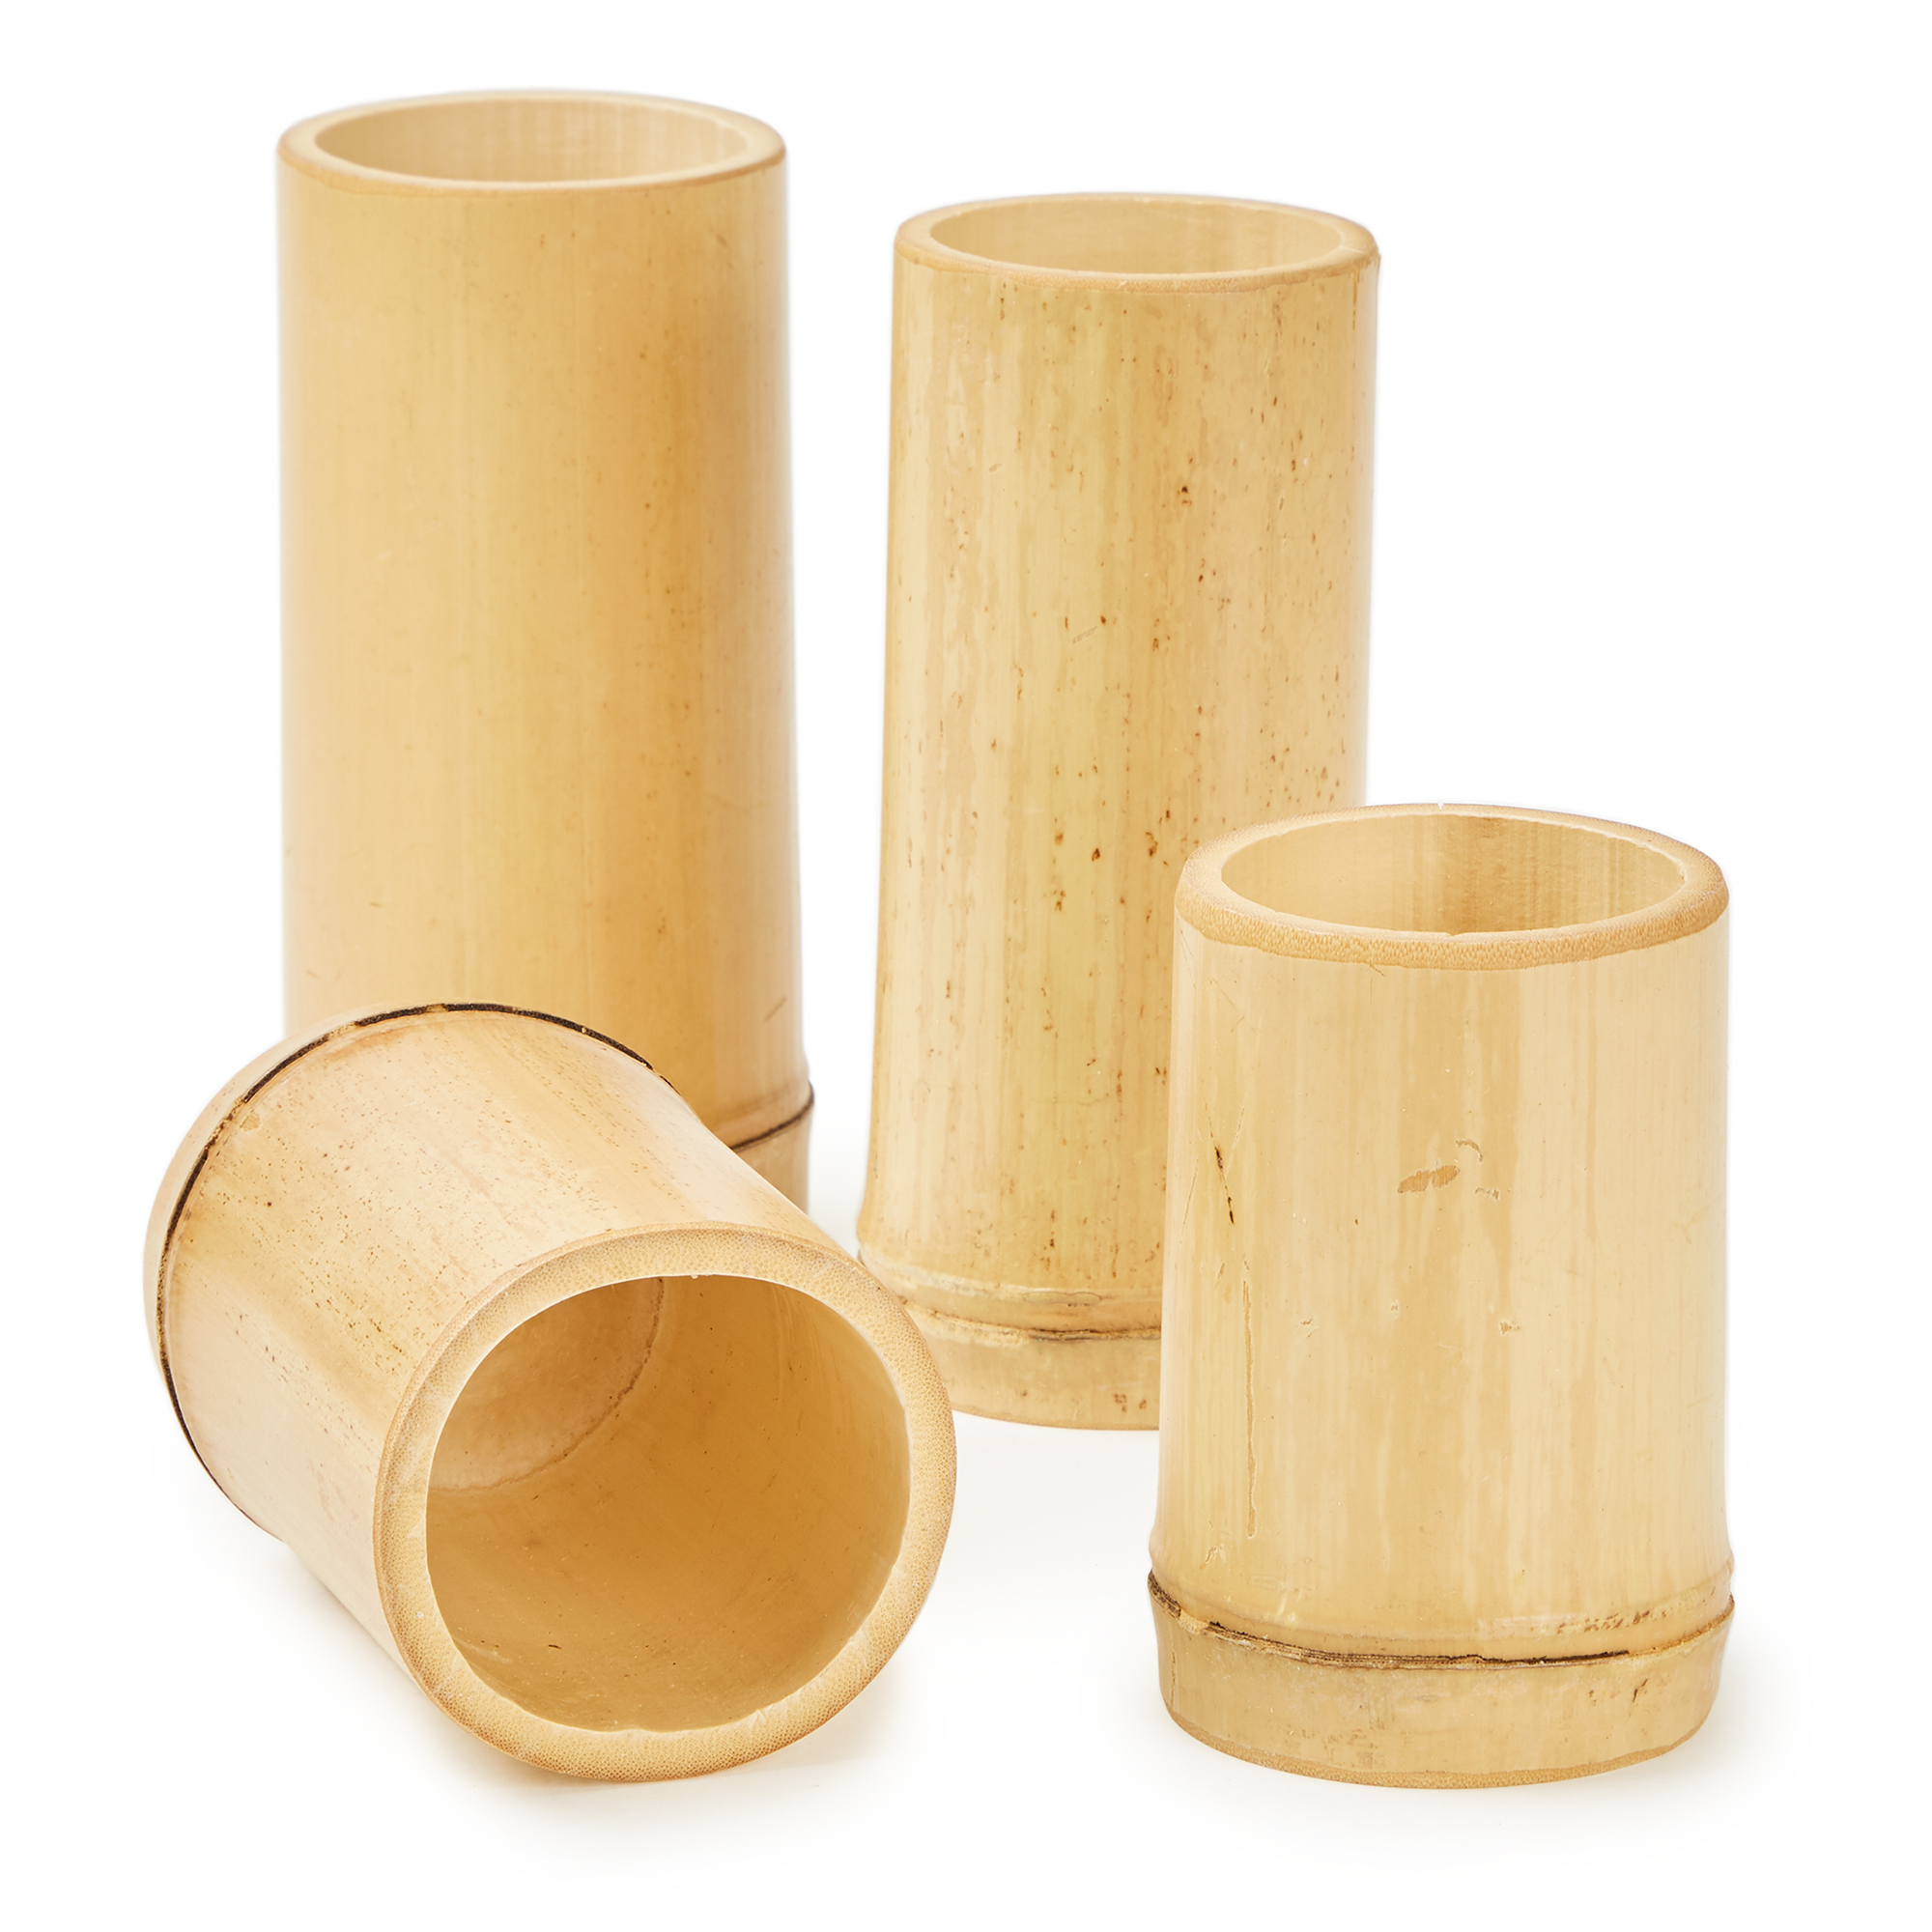 HC1776196 - Bamboo Cups - Set of 4